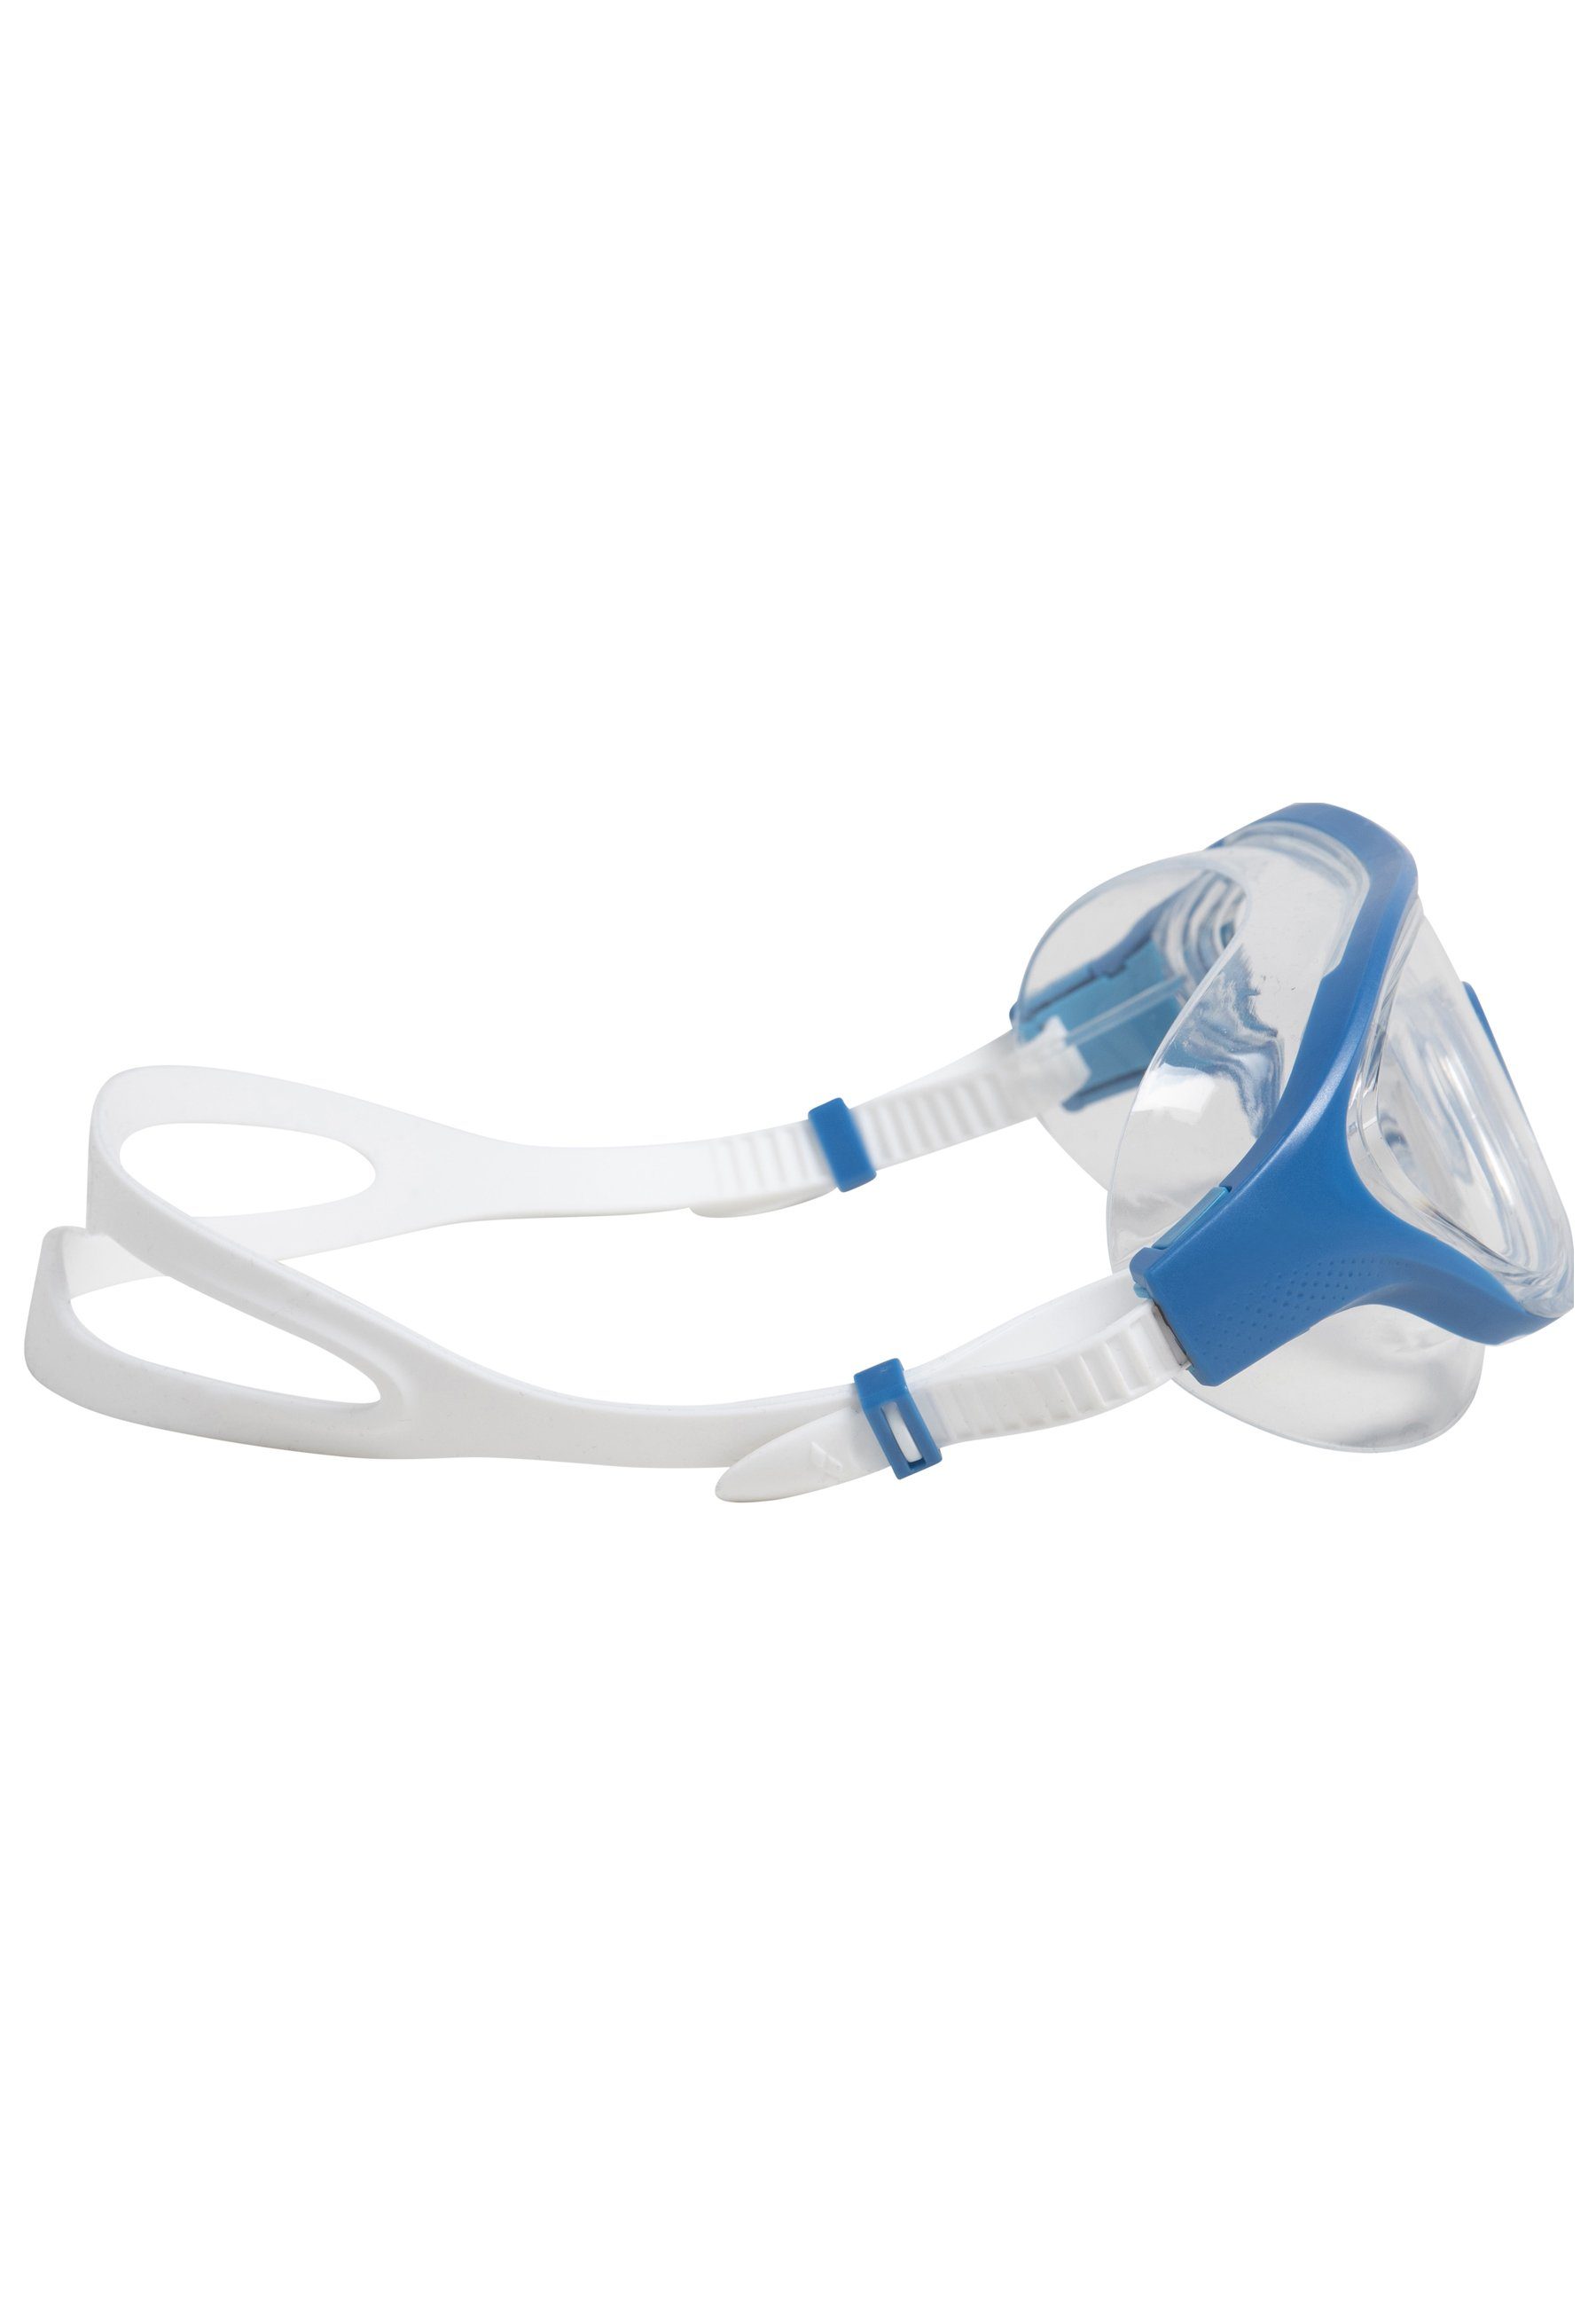 The Sportbrille clear-blue-white One Mask Arena